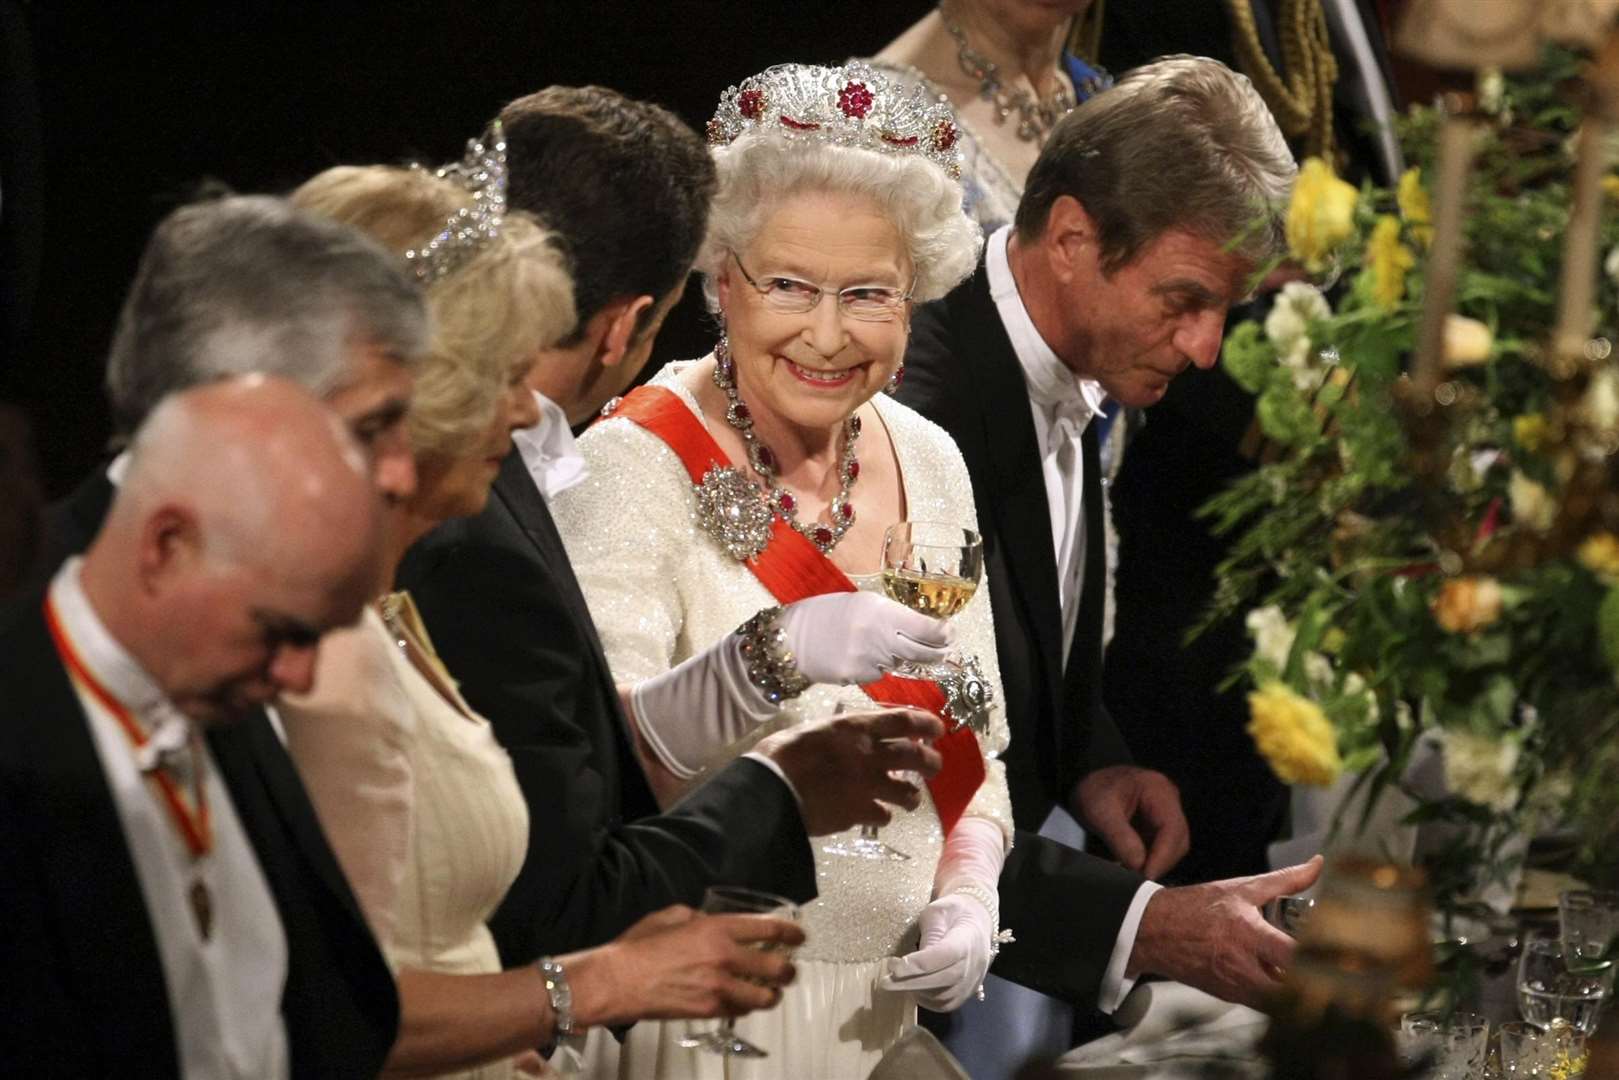 The Queen toasts French President Nicolas Sarkozy at a state banquet at Windsor Castle in 2008 (Matt Dunham/PA)